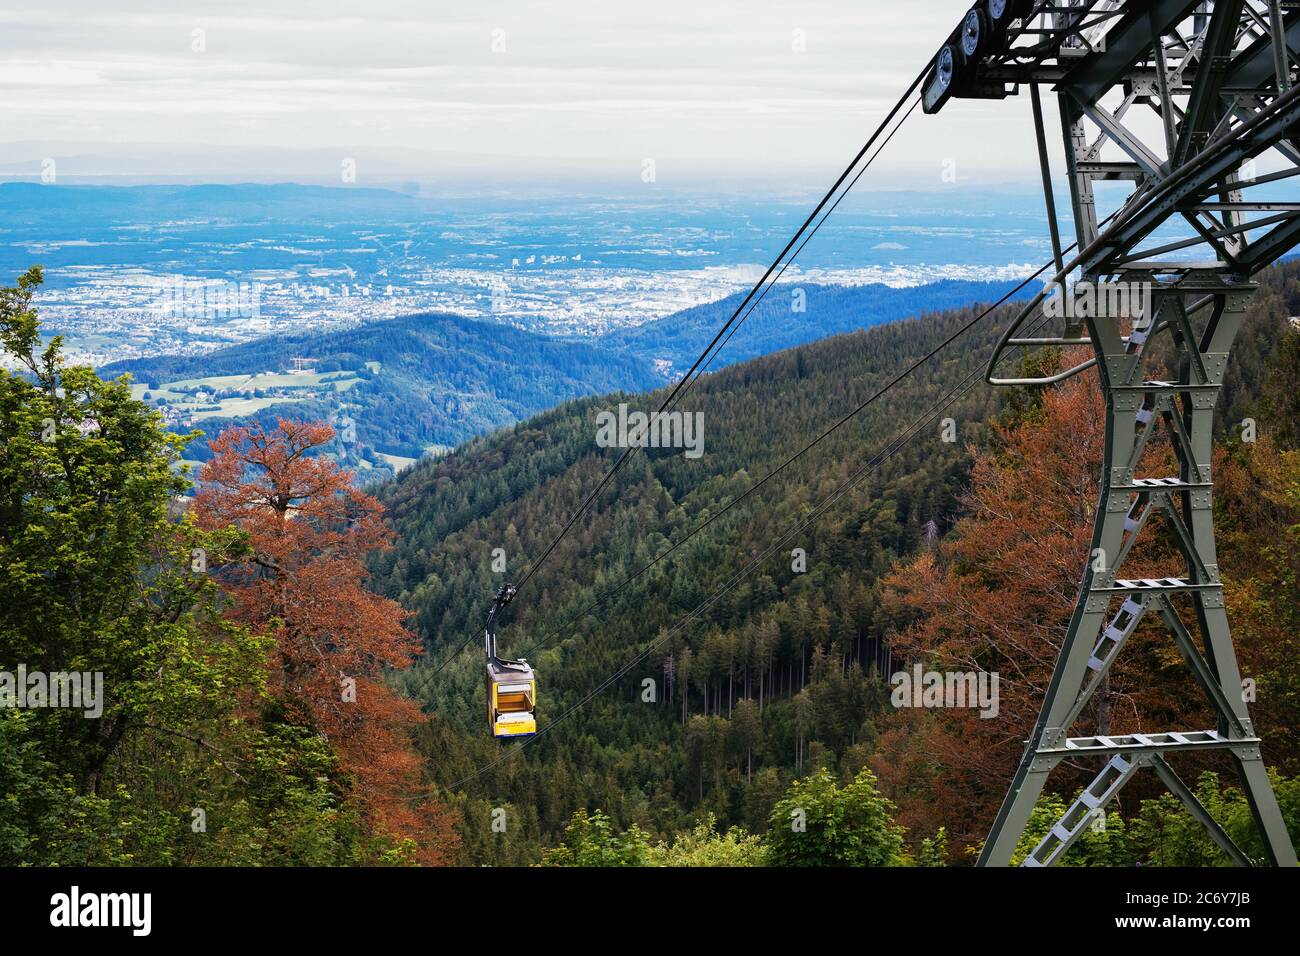 Freiburg, Germany. 30th June, 2020. A support of the Schauinsland cable car  is located near the top station on the Schauinsland while a gondola travels  downhill. The Schauinslandbahn is the longest cable